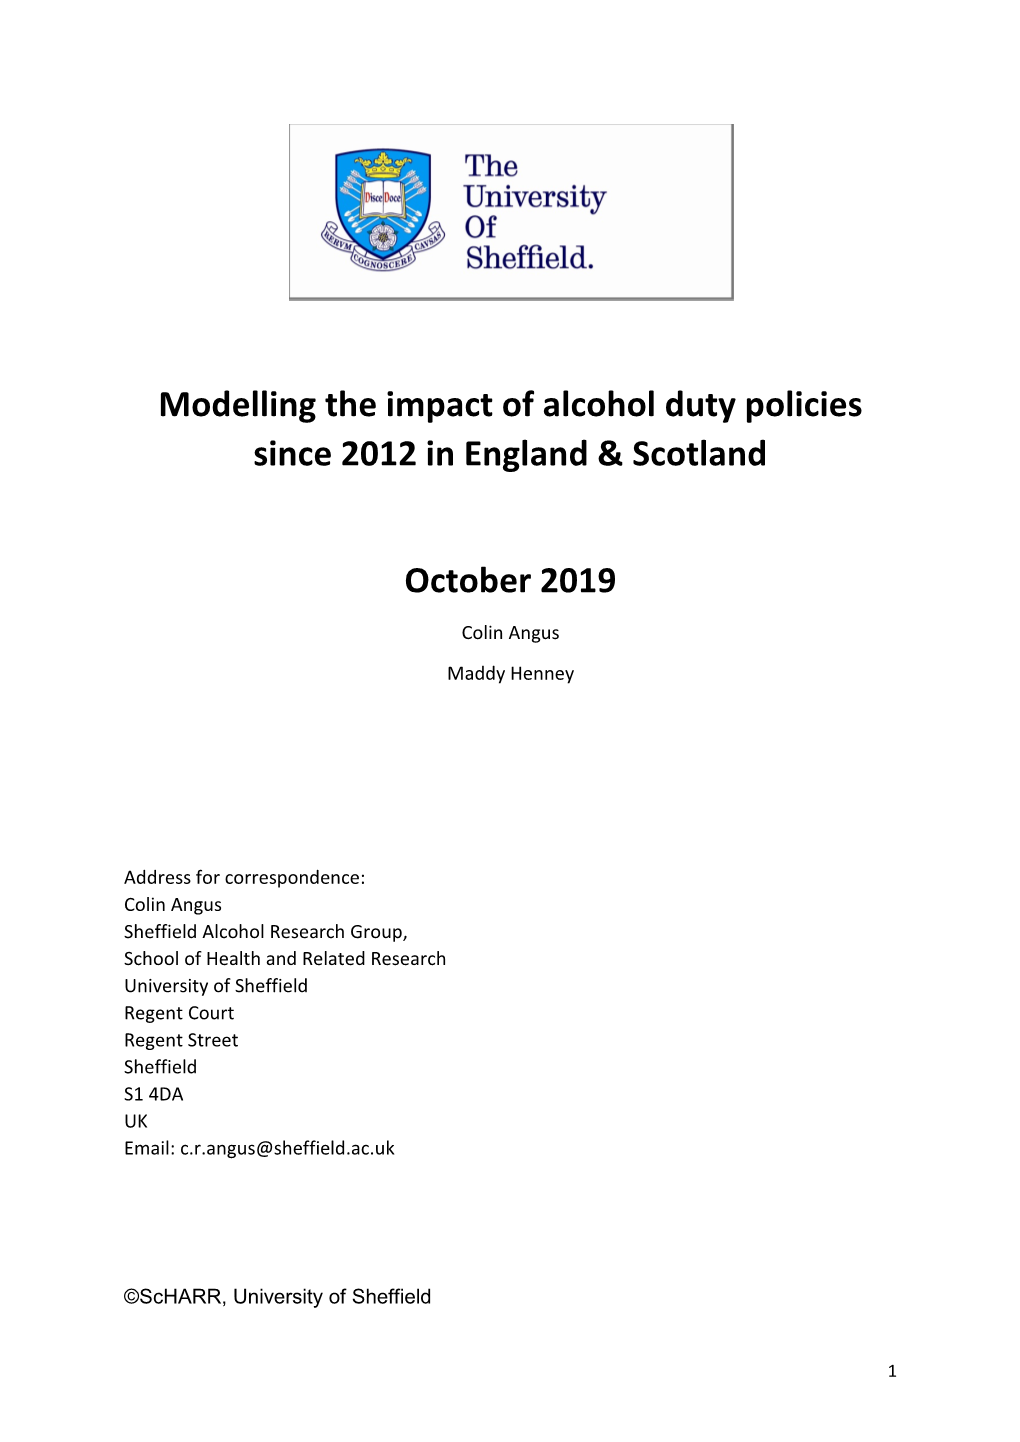 Modelling the Impact of Alcohol Duty Policies Since 2012 in England & Scotland October 2019